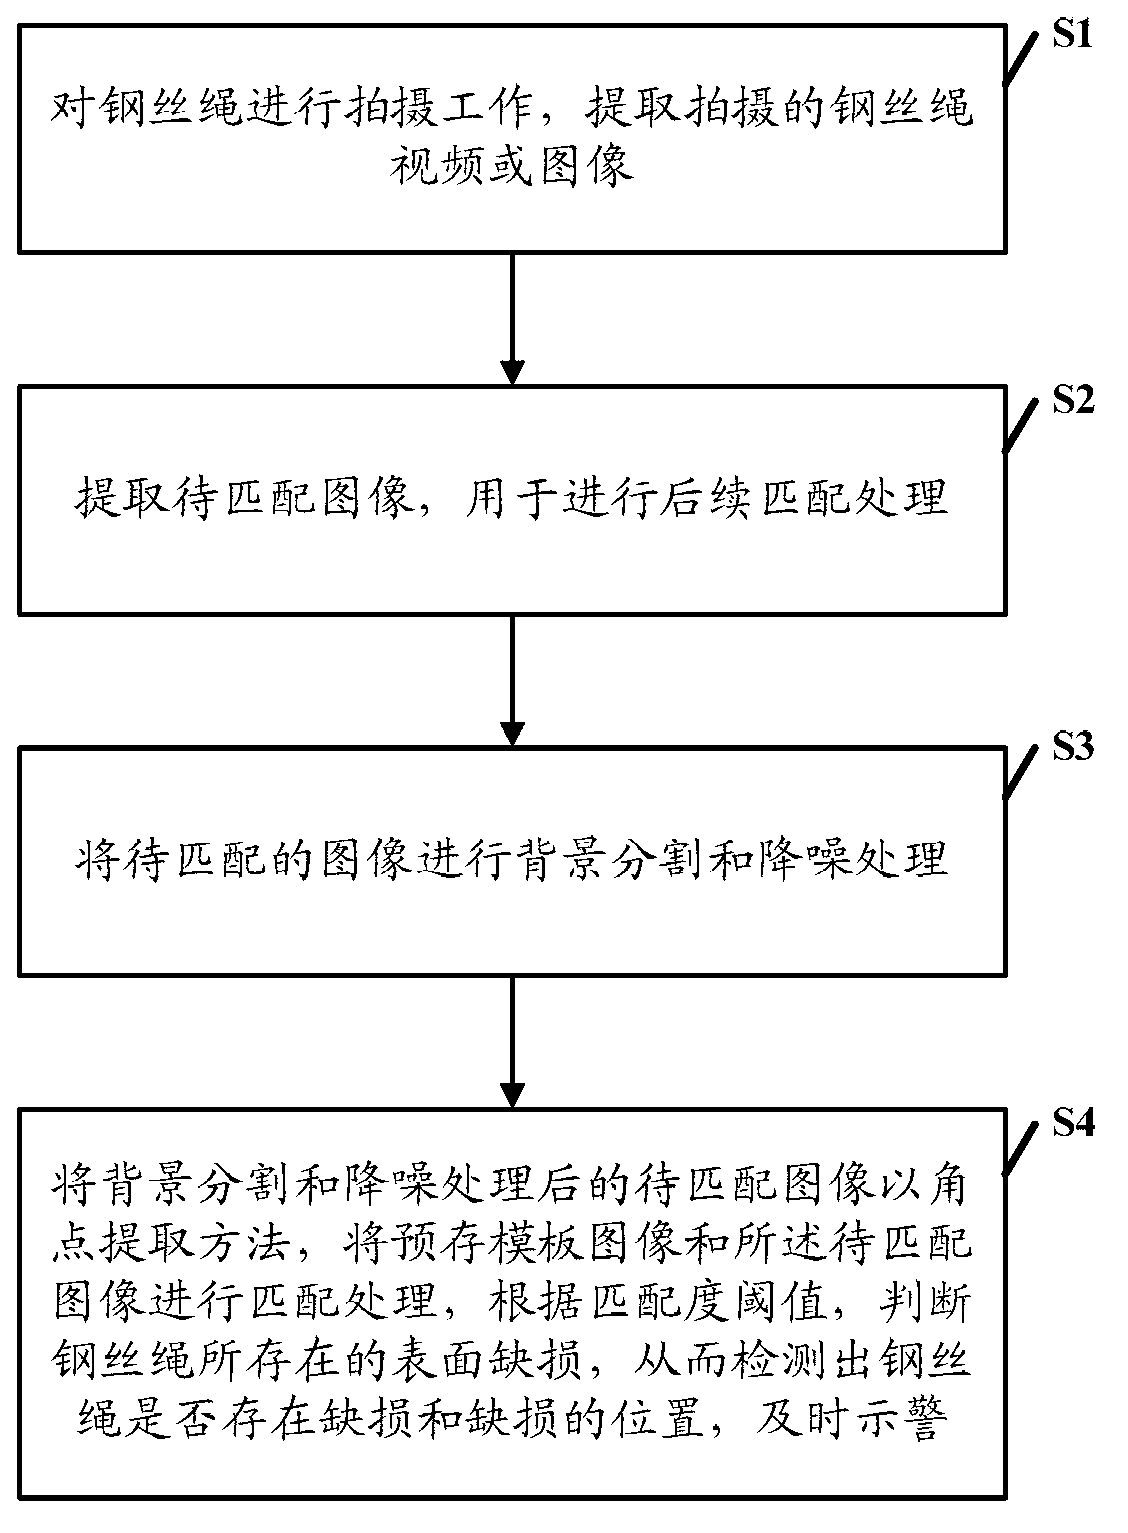 Steel wire rope surface damage detection method based on image matching